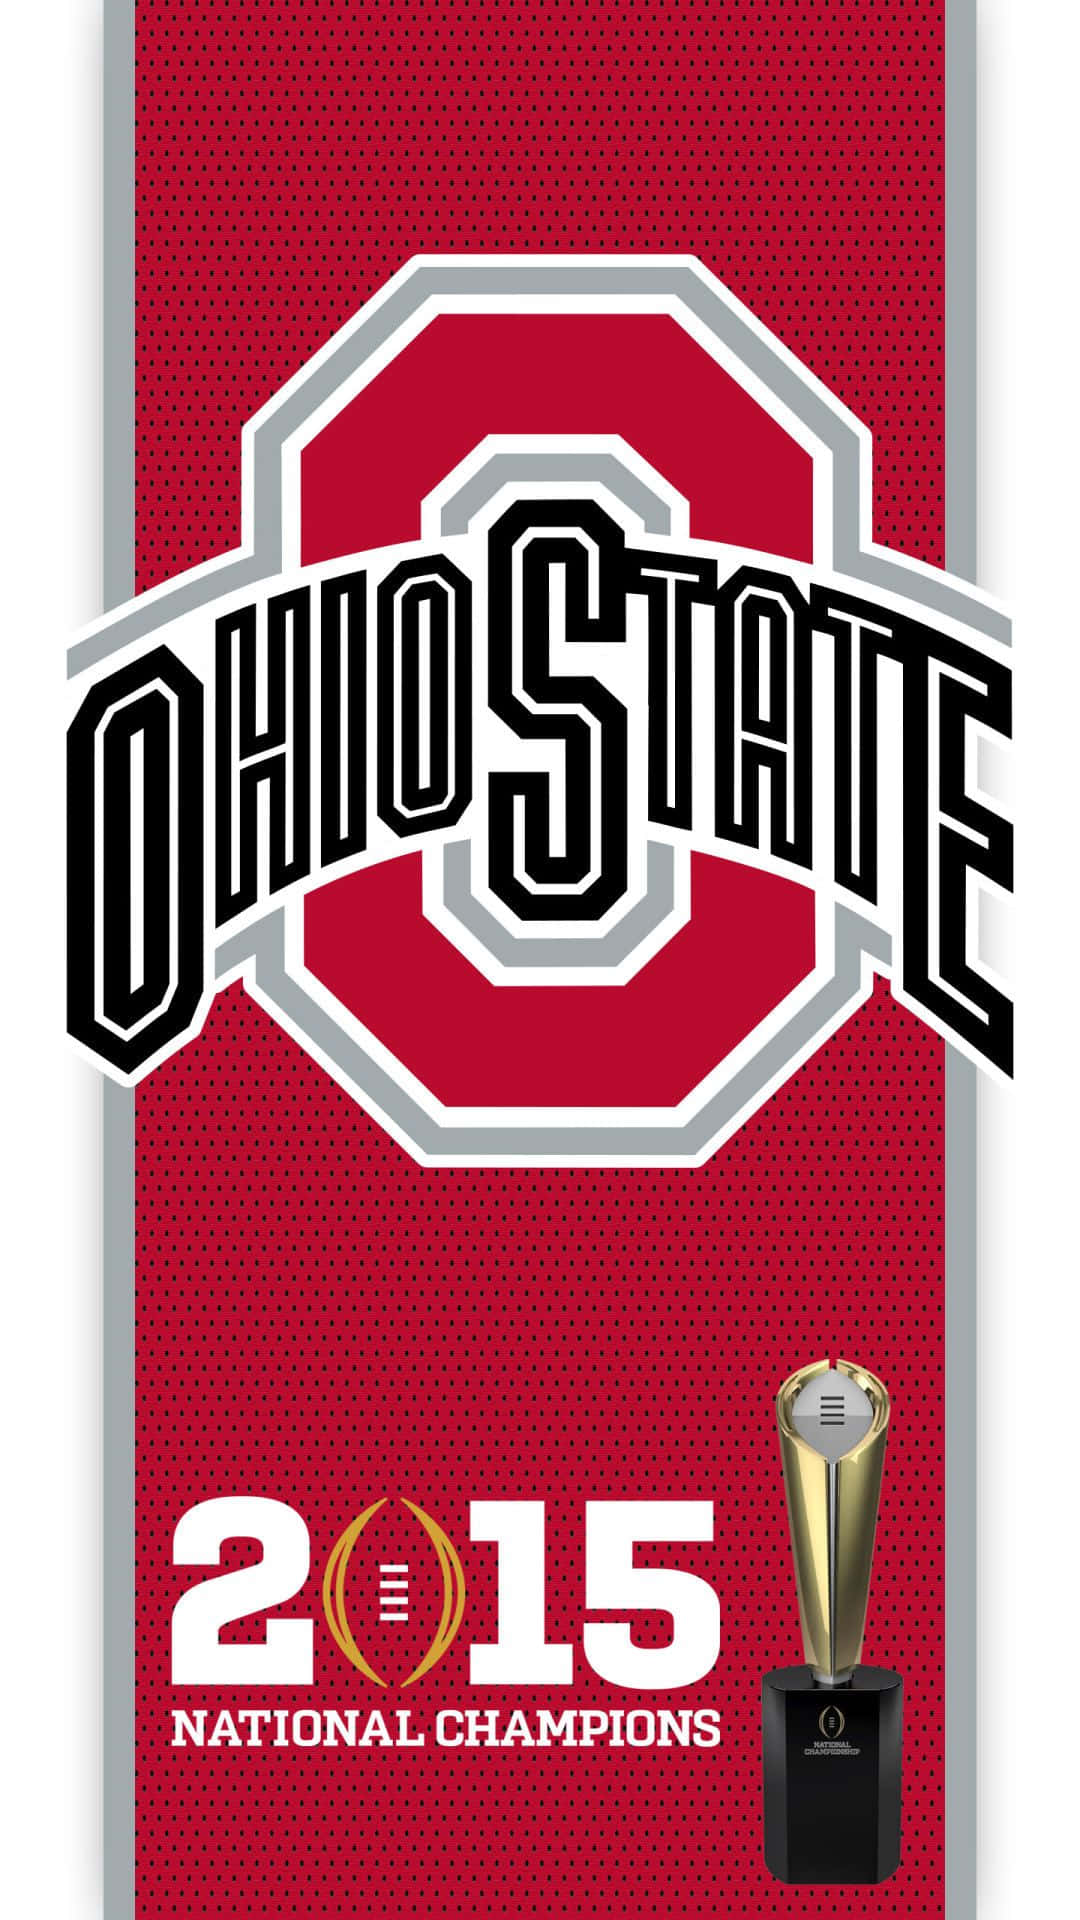 Ohio State Football IPhone 2015 National Championship Wallpaper